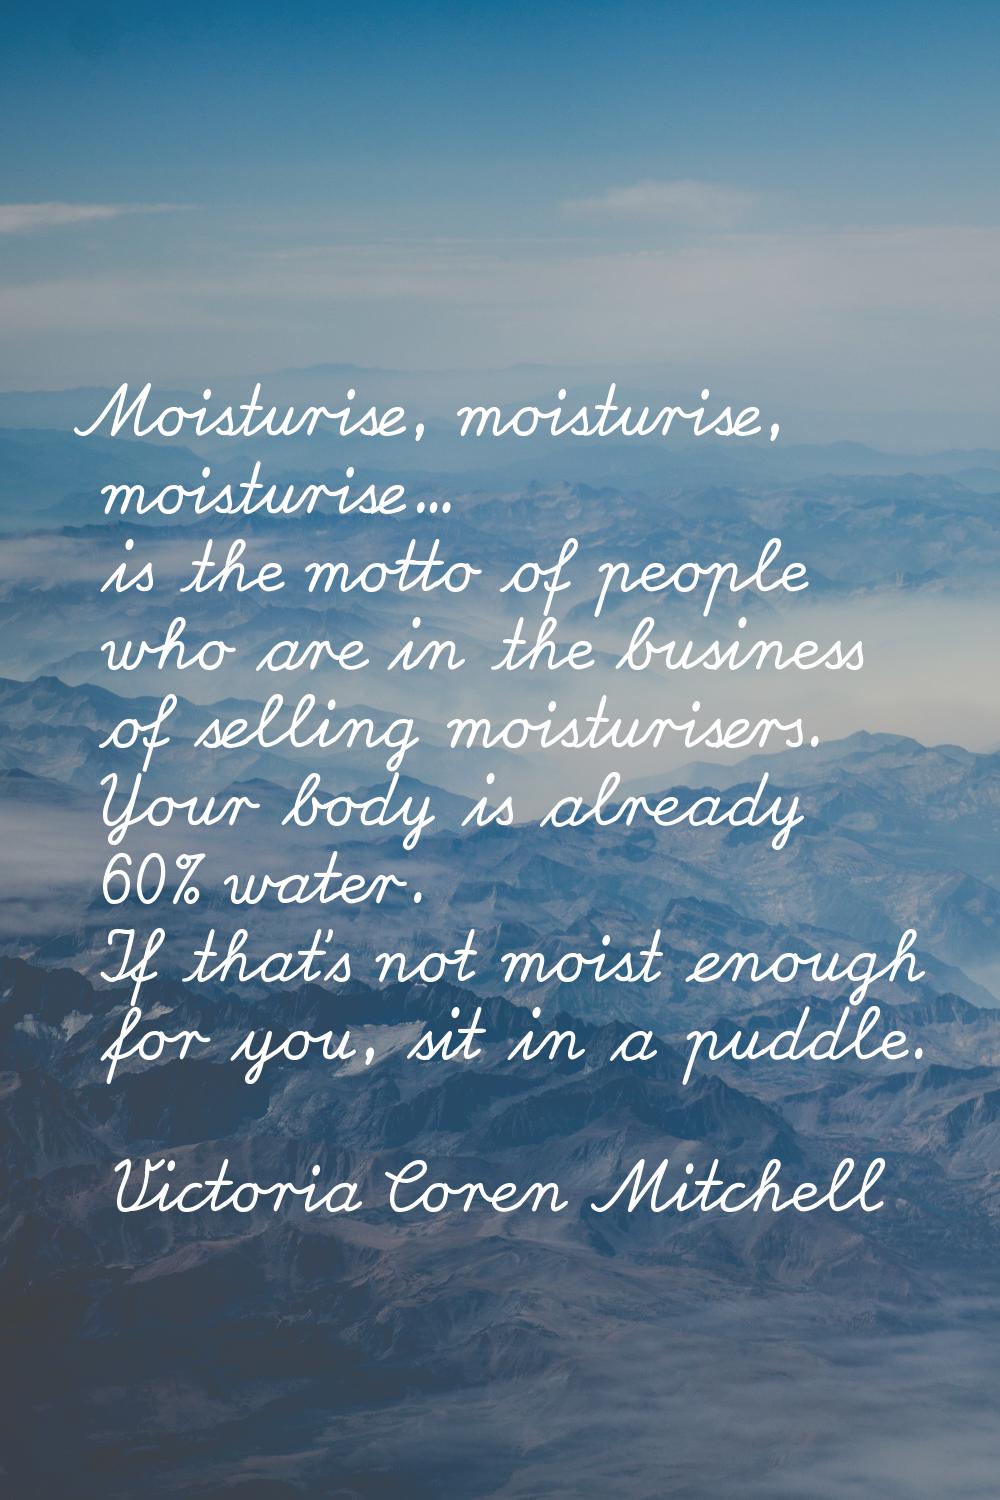 Moisturise, moisturise, moisturise... is the motto of people who are in the business of selling moi